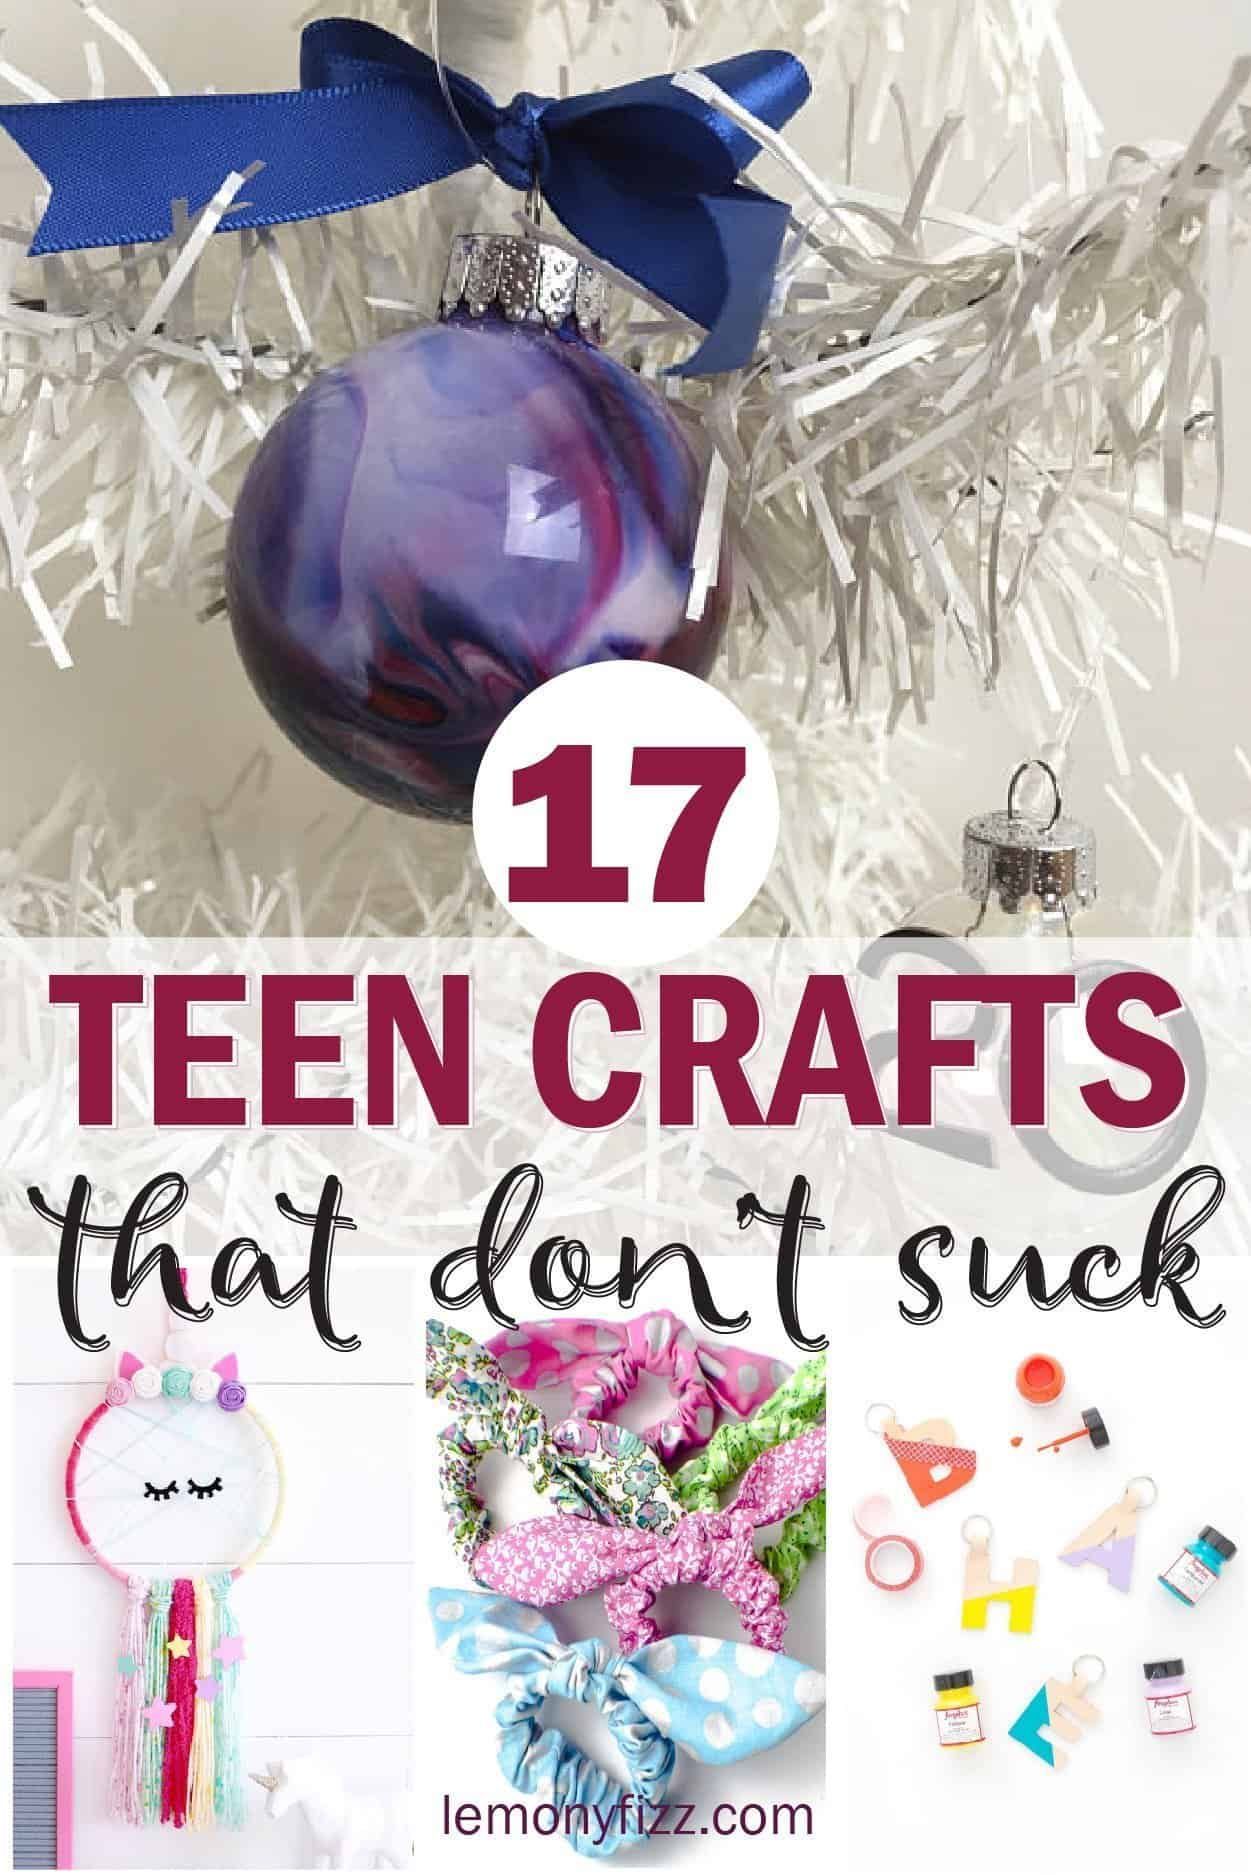 17 Teen Crafts that Don't Suck -   17 diy projects for kids teen crafts ideas